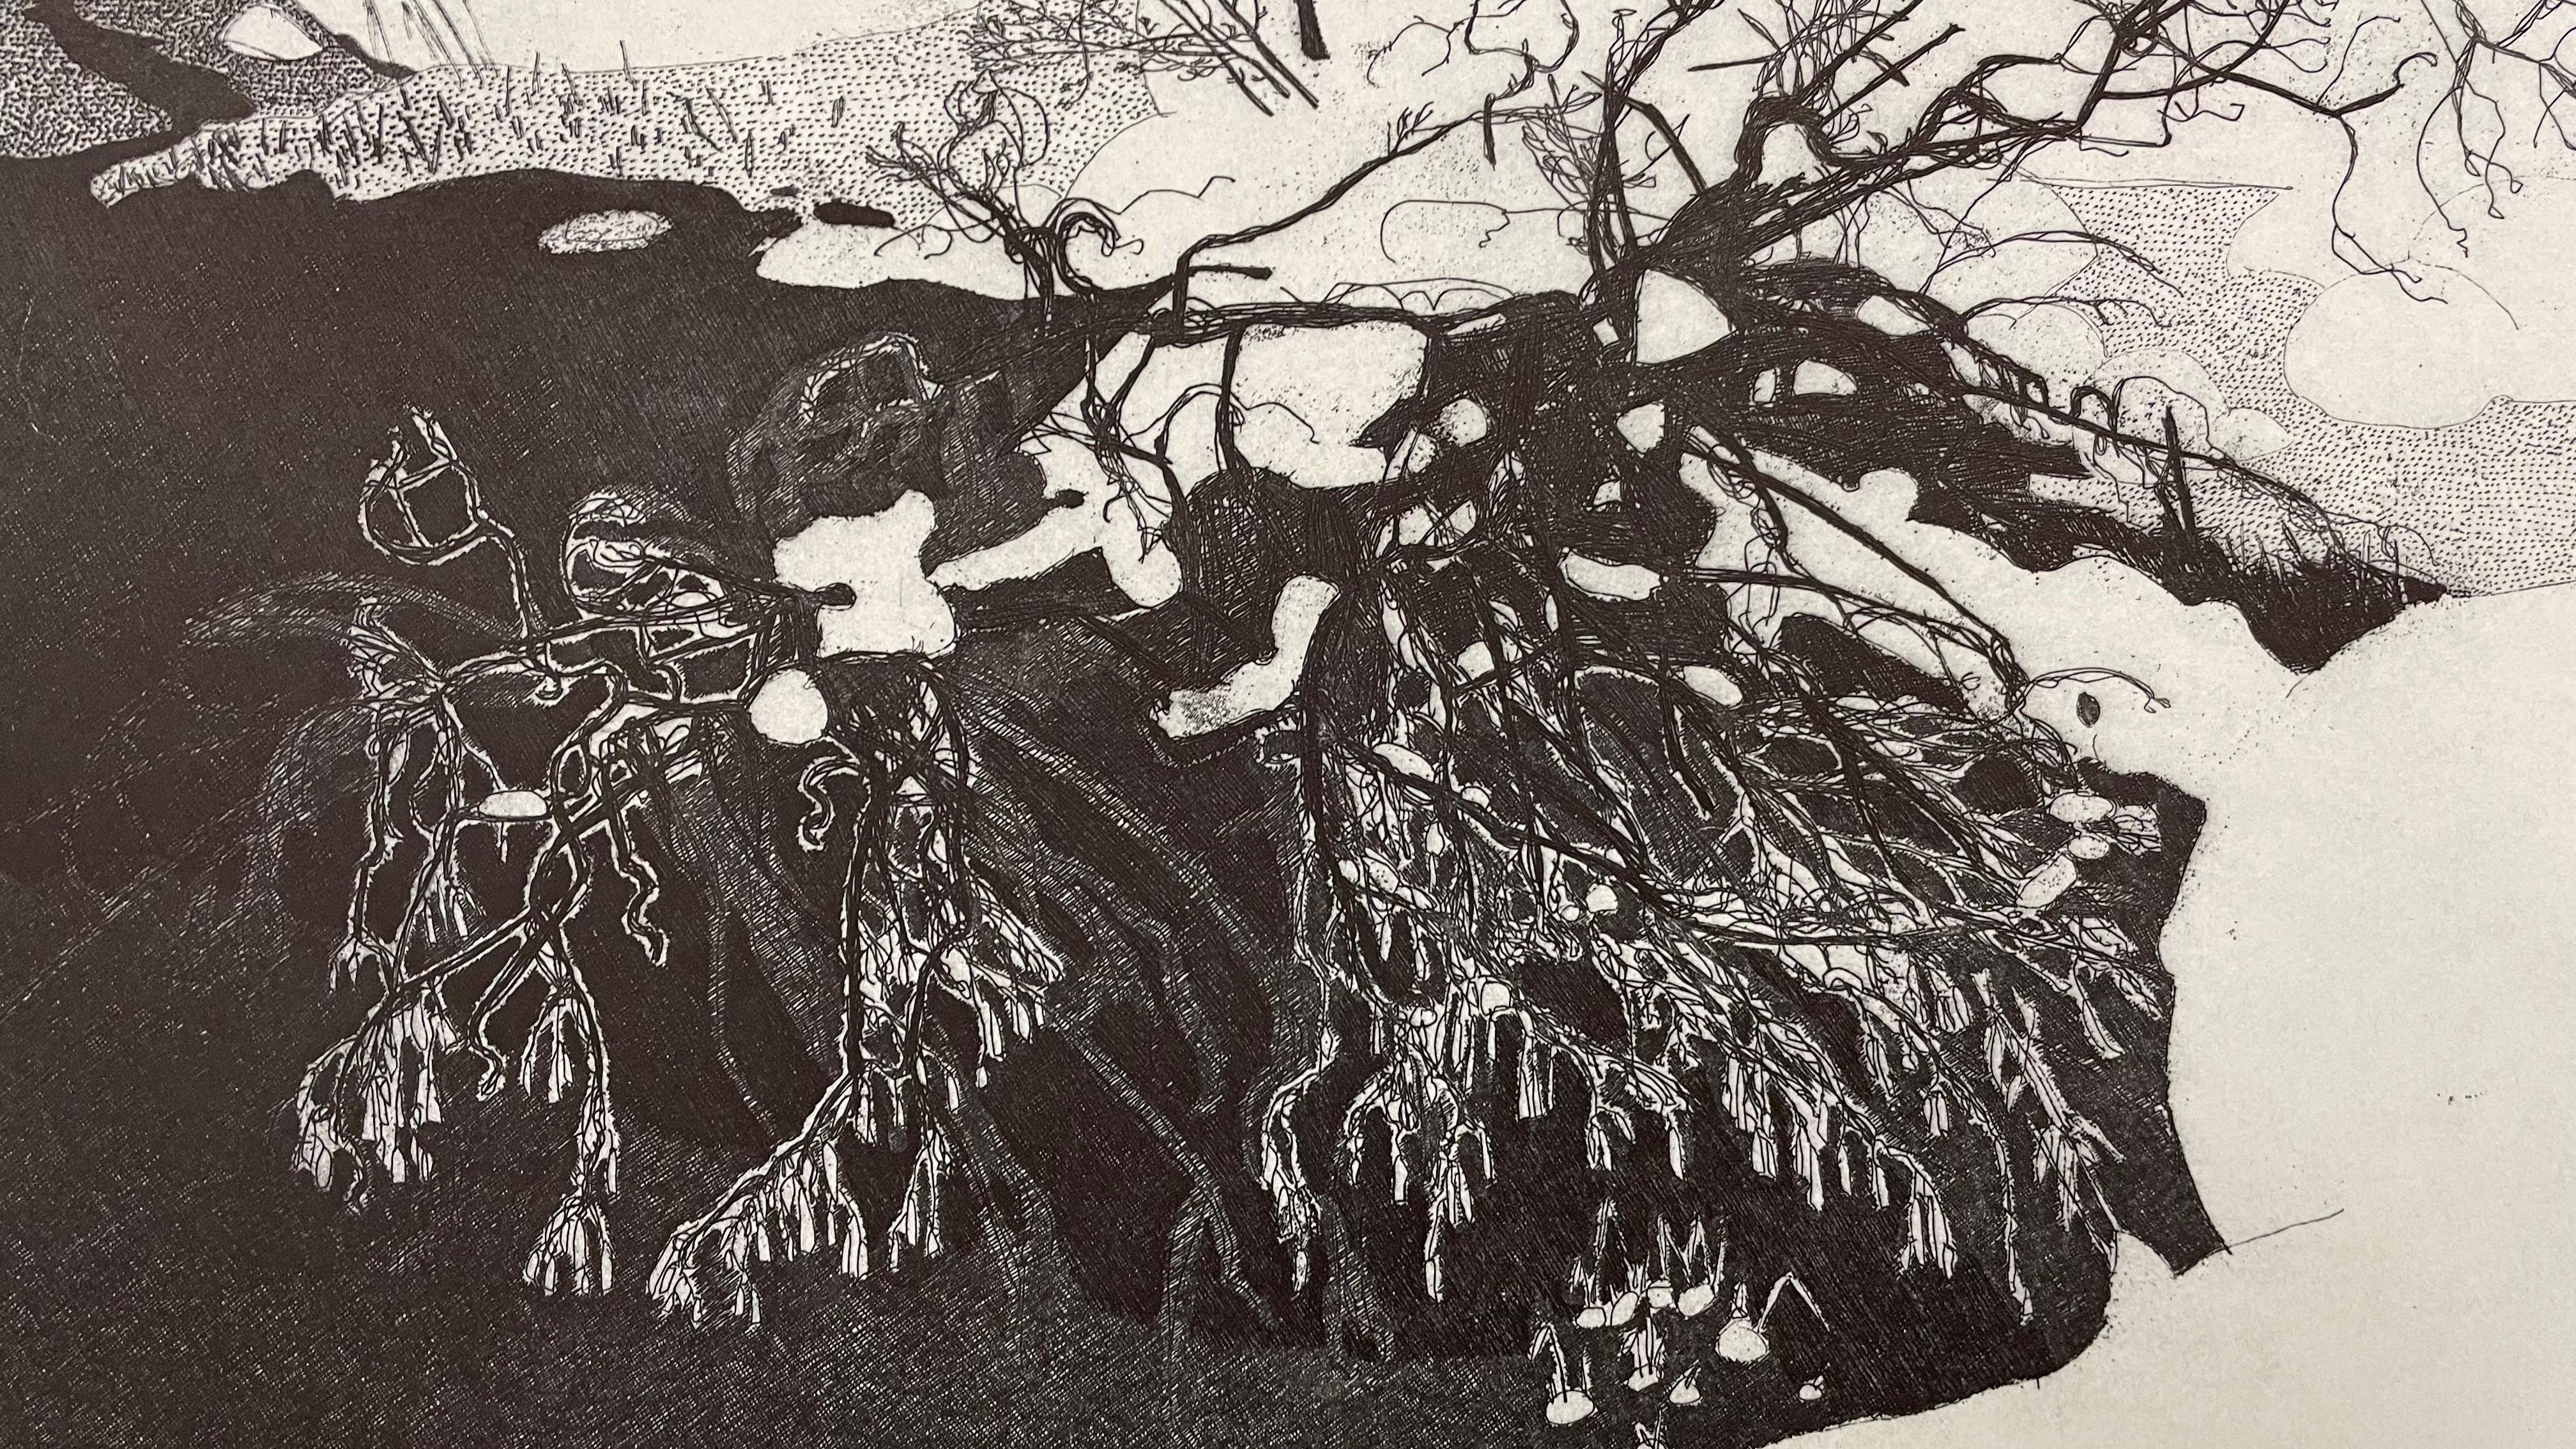 Snowed river, 1982, rif. 425, Etching Print by Federica Galli For Sale 2